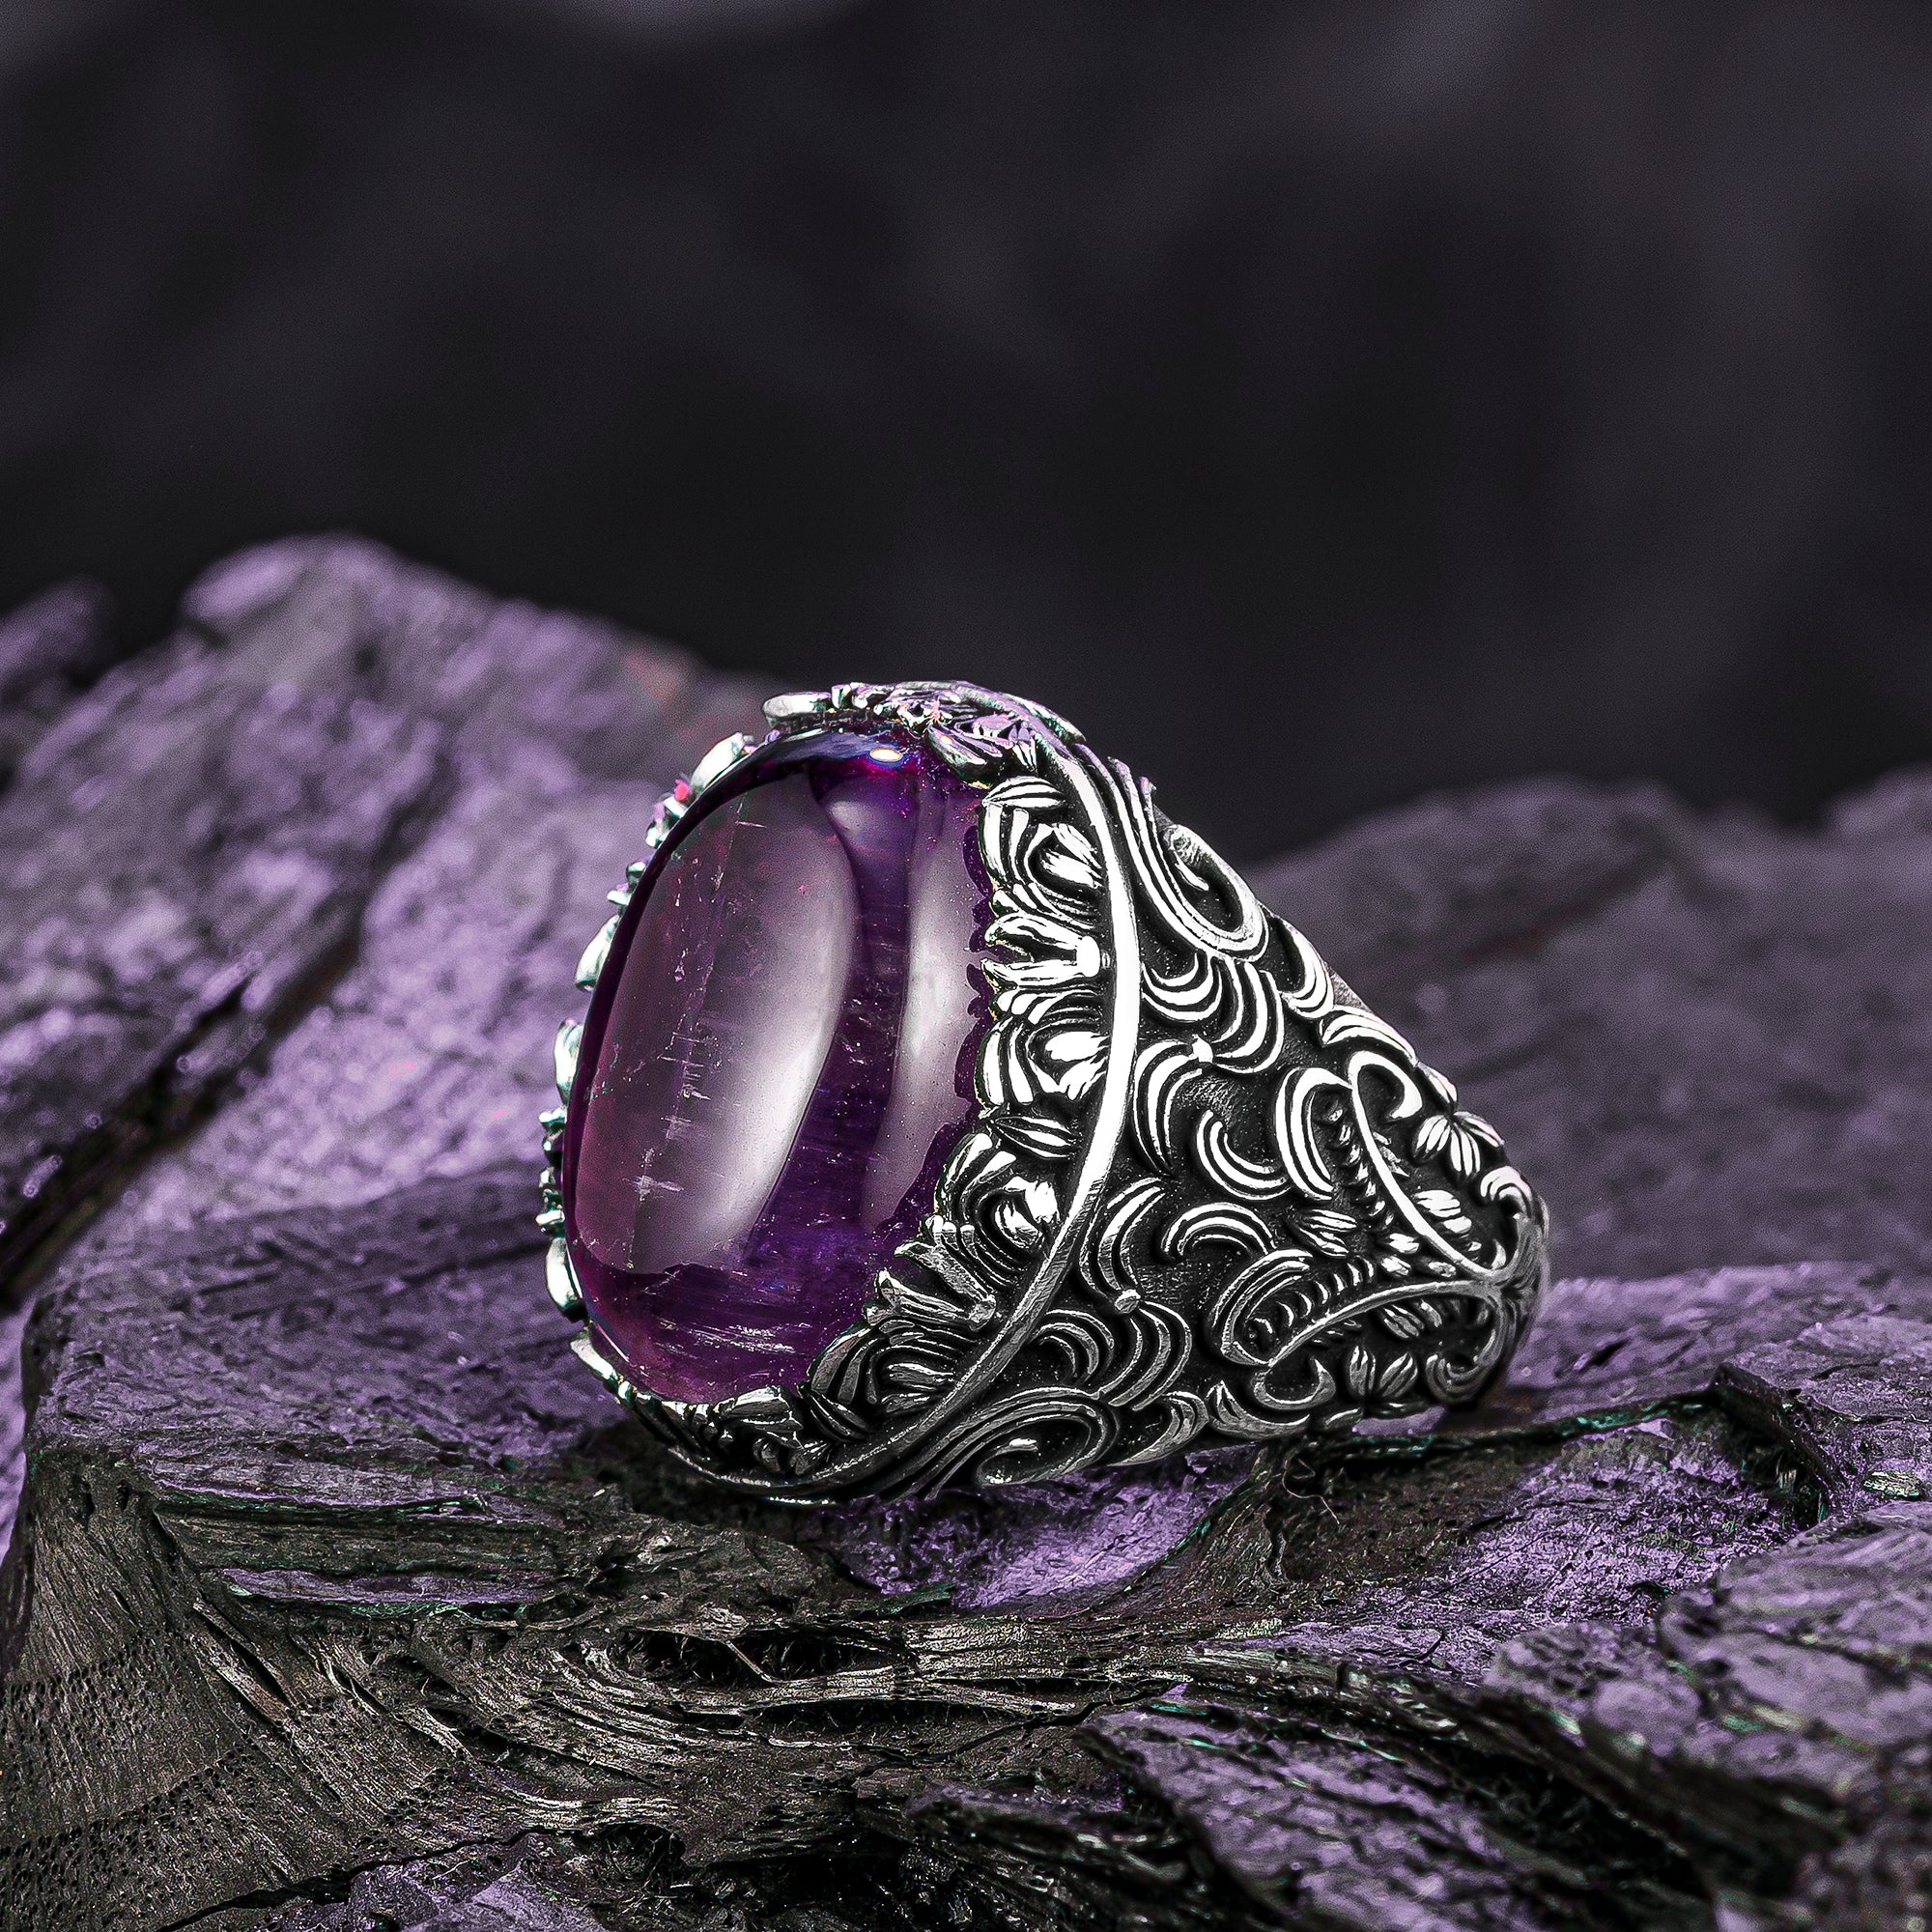 Cabachon Amethyst Gemstone Ring, Engraved Silver Men Ring, Floral Design Men Ring, Men Silver Jewelry, Anniversary Gift for Husband